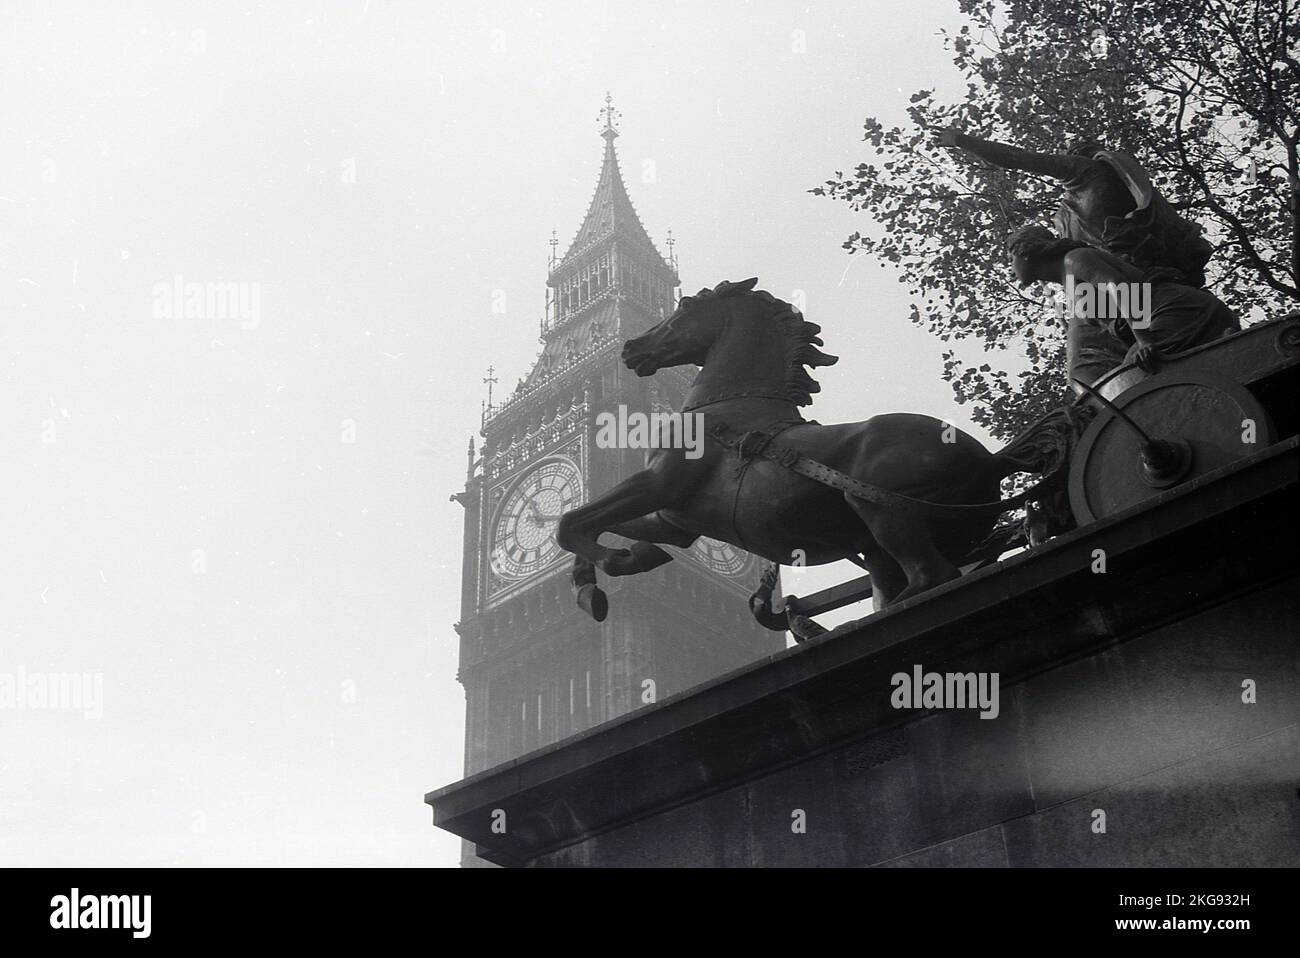 1950s, historical, a view of the Roman statue, 'Boadicea and Her Daughters' located in Westminster, seen against the Clock Tower (Big Ben) by the Palace of Westminter, home of the UK Goverment.  Representing Boudica, queen of the Celtic Iceni tribe who led an uprising in Roman Britain, the sculptor was Englisih artist and engineer, Thomas Thornycroft. Although completed in 1885, it was not until 1902 that it was cast in bronze and installed on the north side of Parliament Hill. Stock Photo